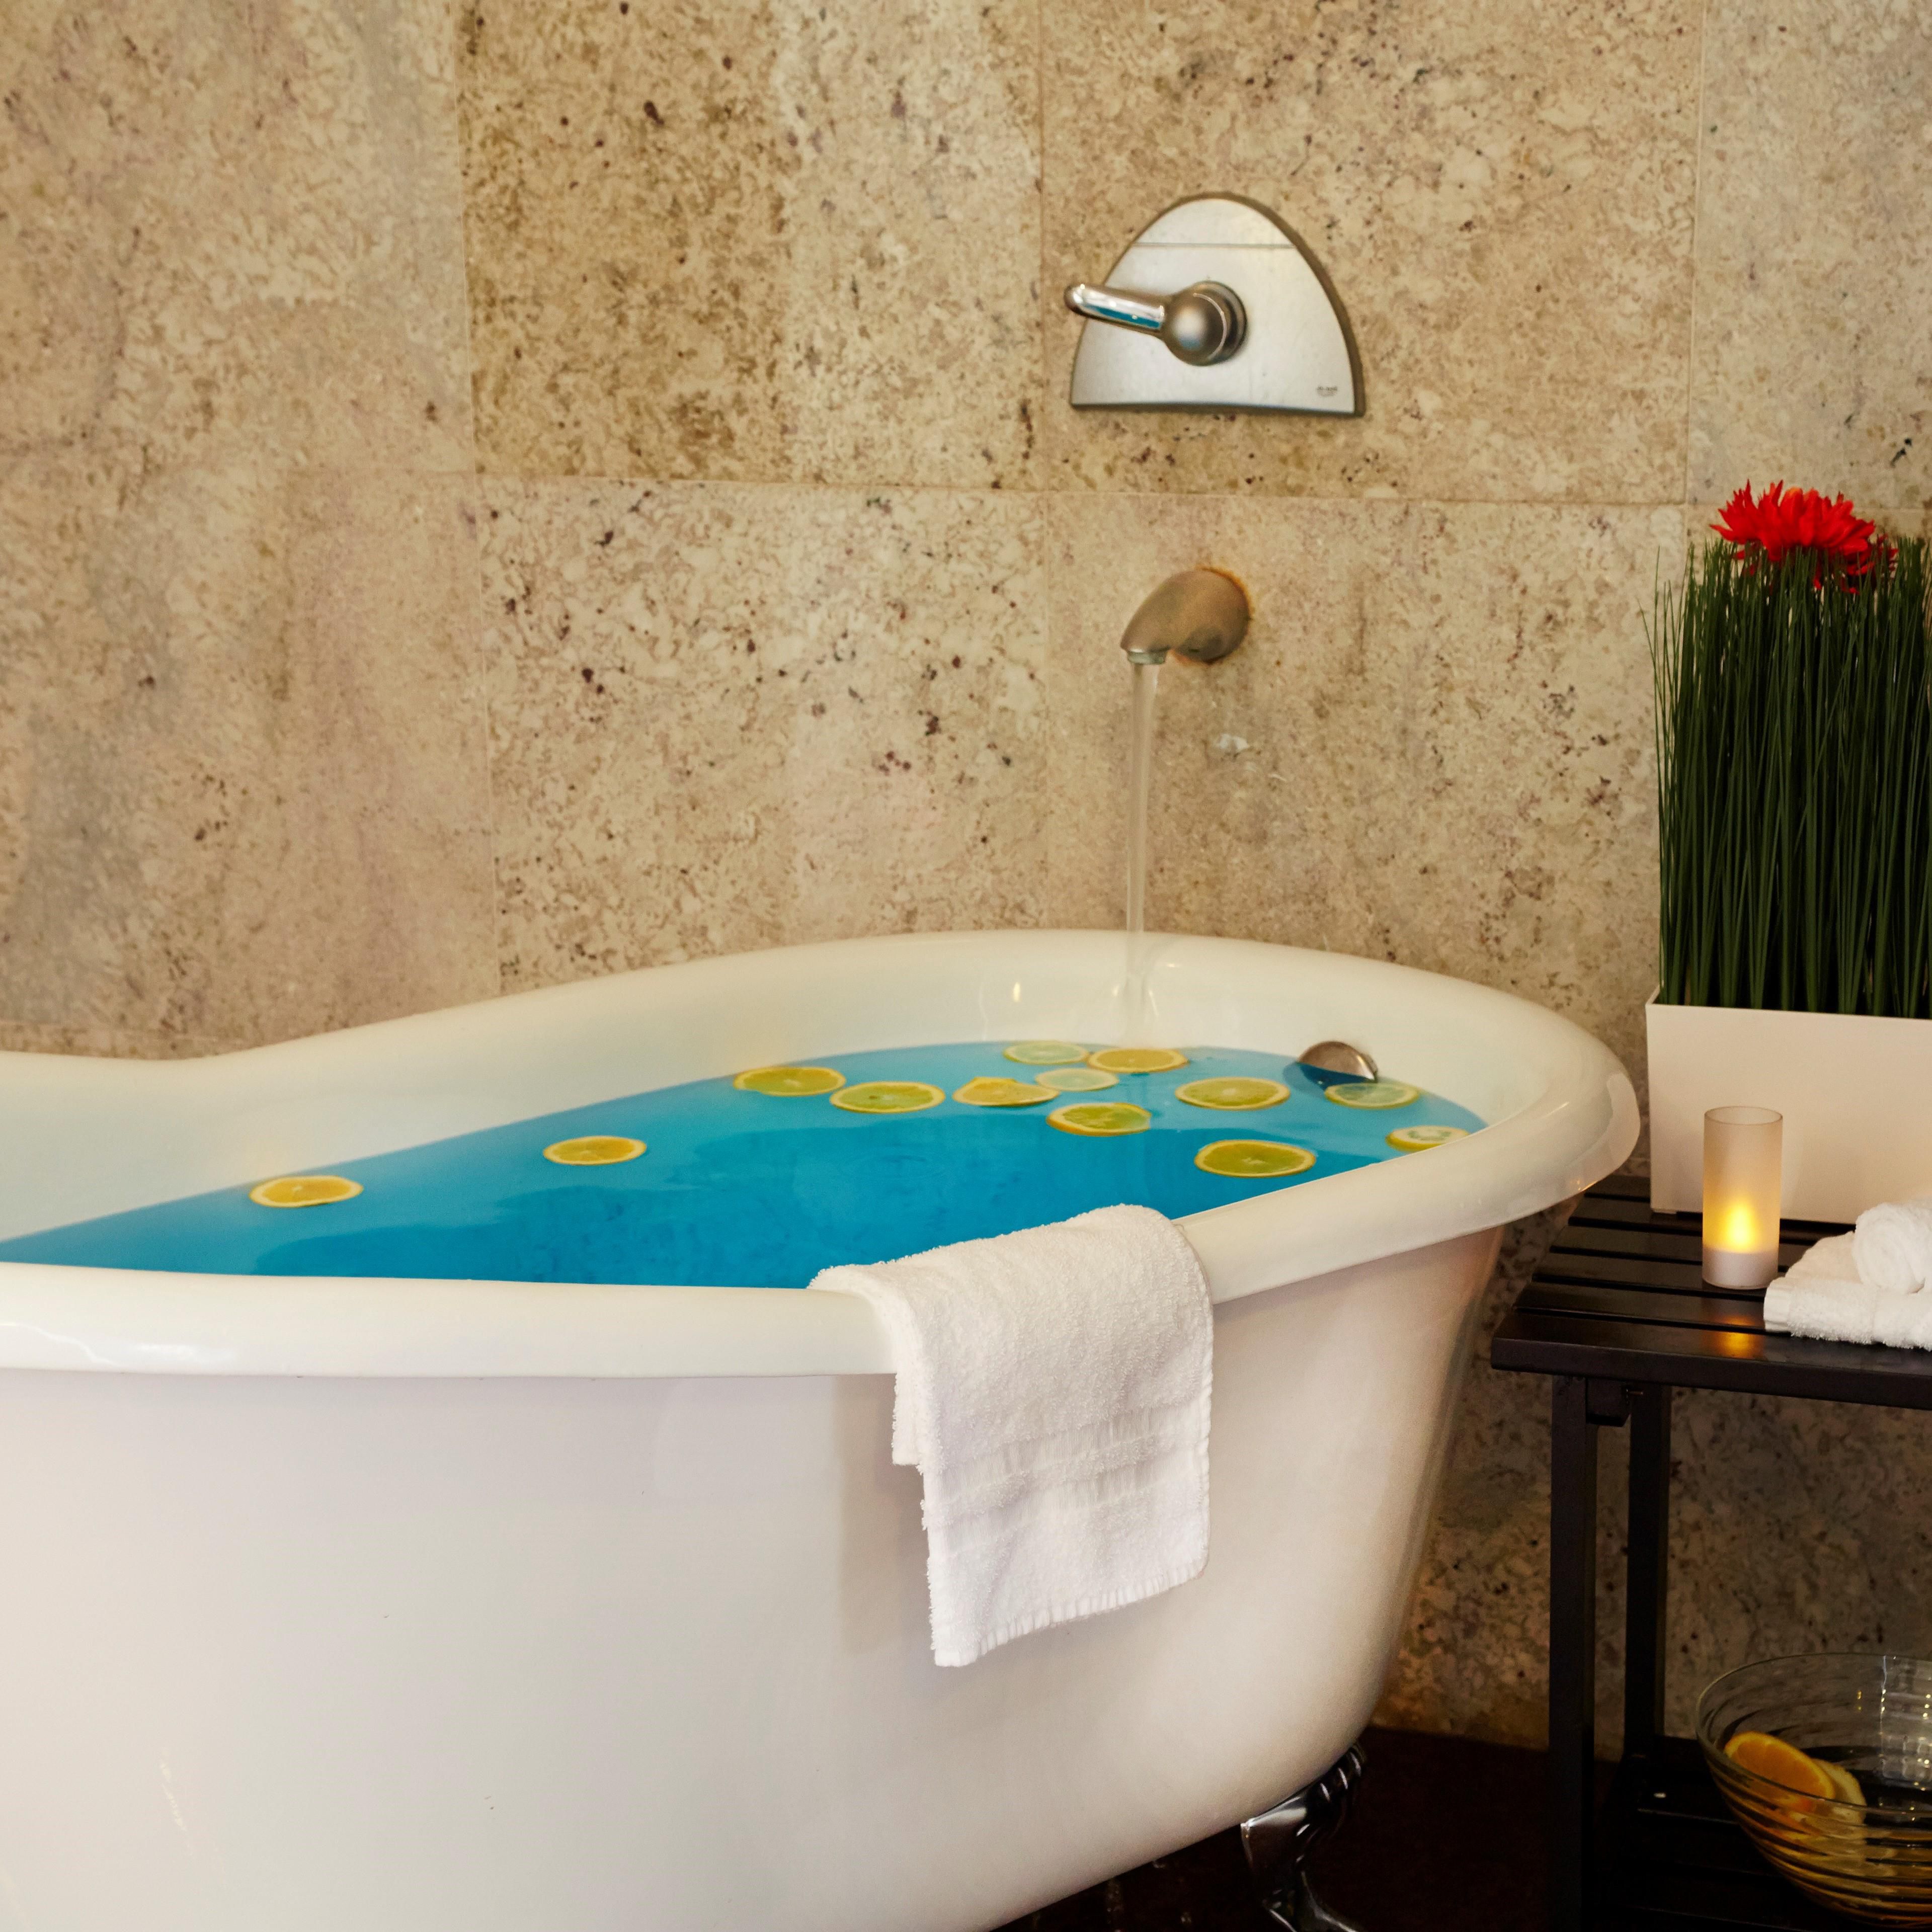 Relax in style at the Meridian Day Spa in the Crowne Plaza